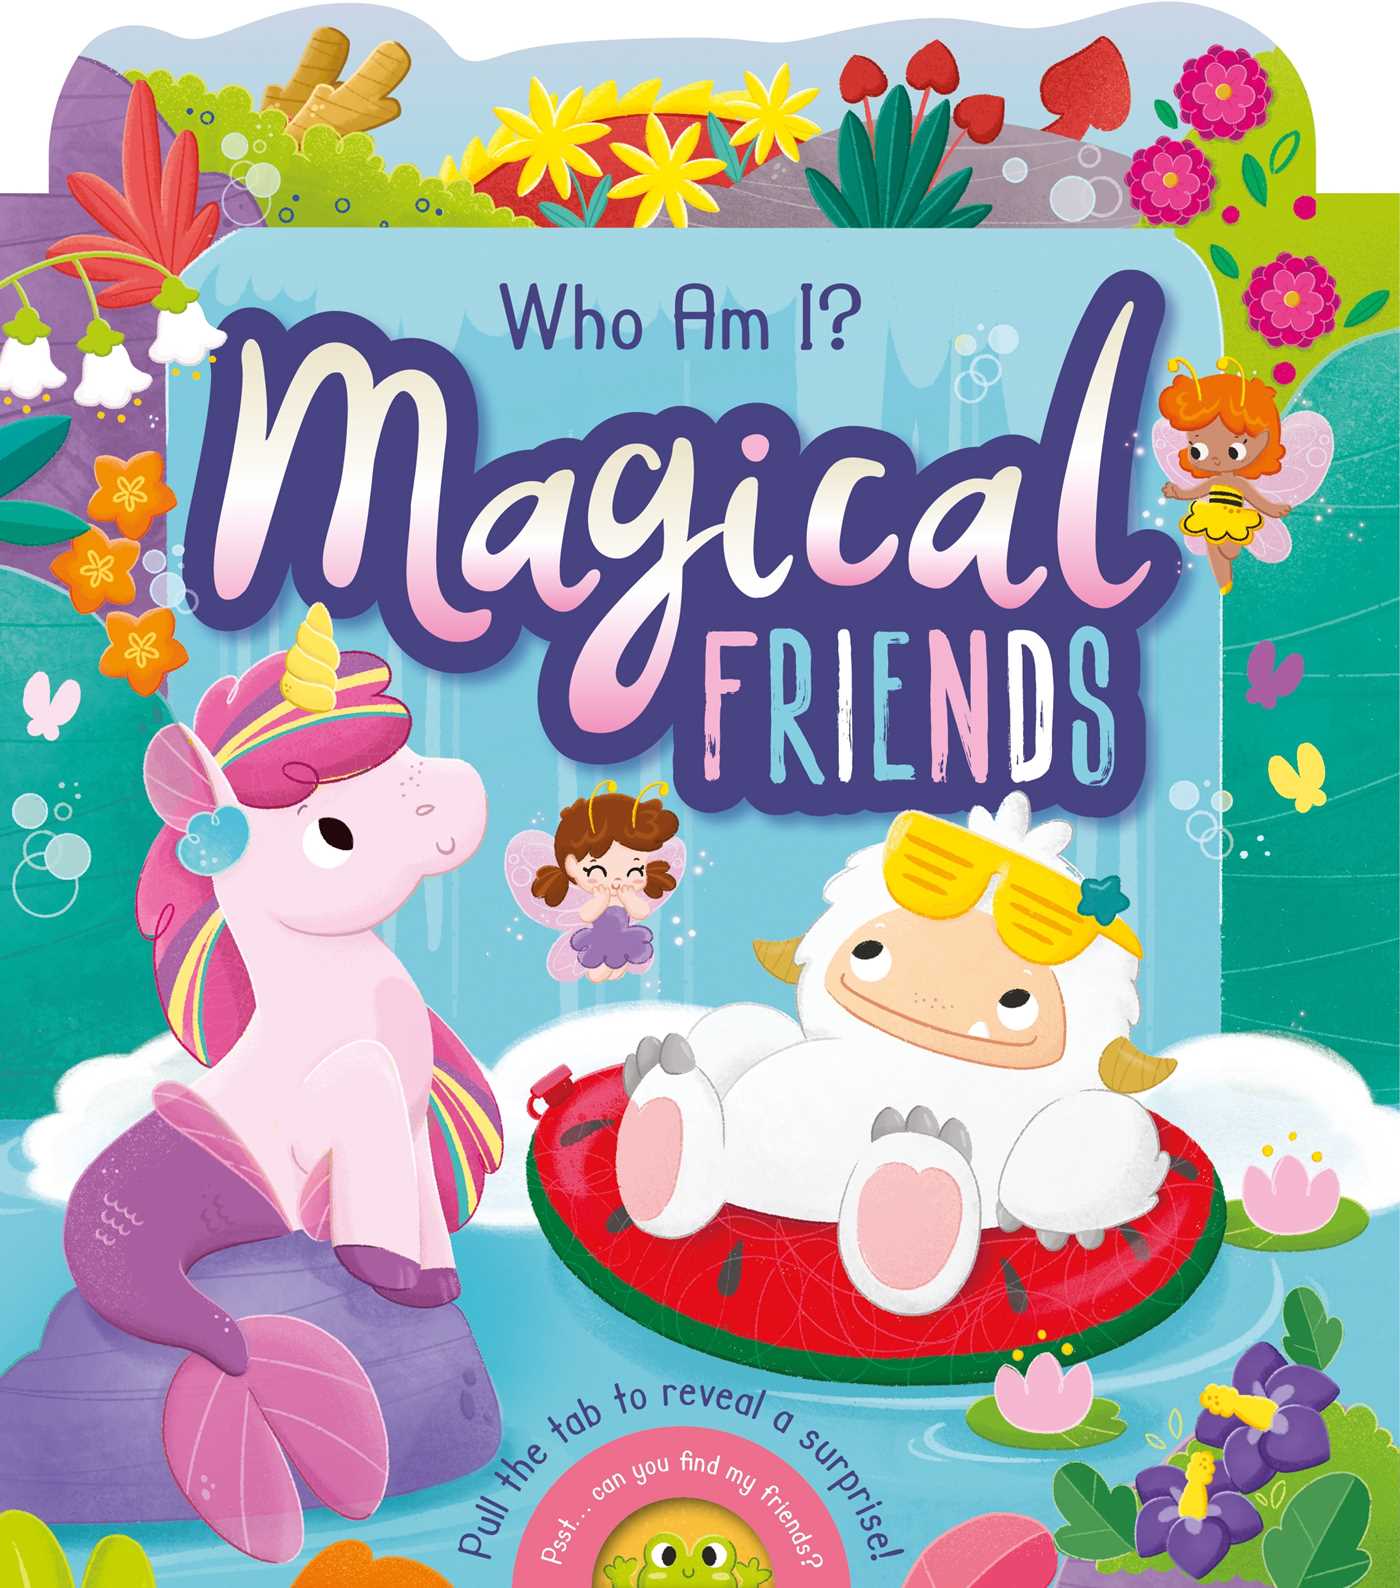 Who Am I? Magical Friends (Pull the tab to reveal a surprise!